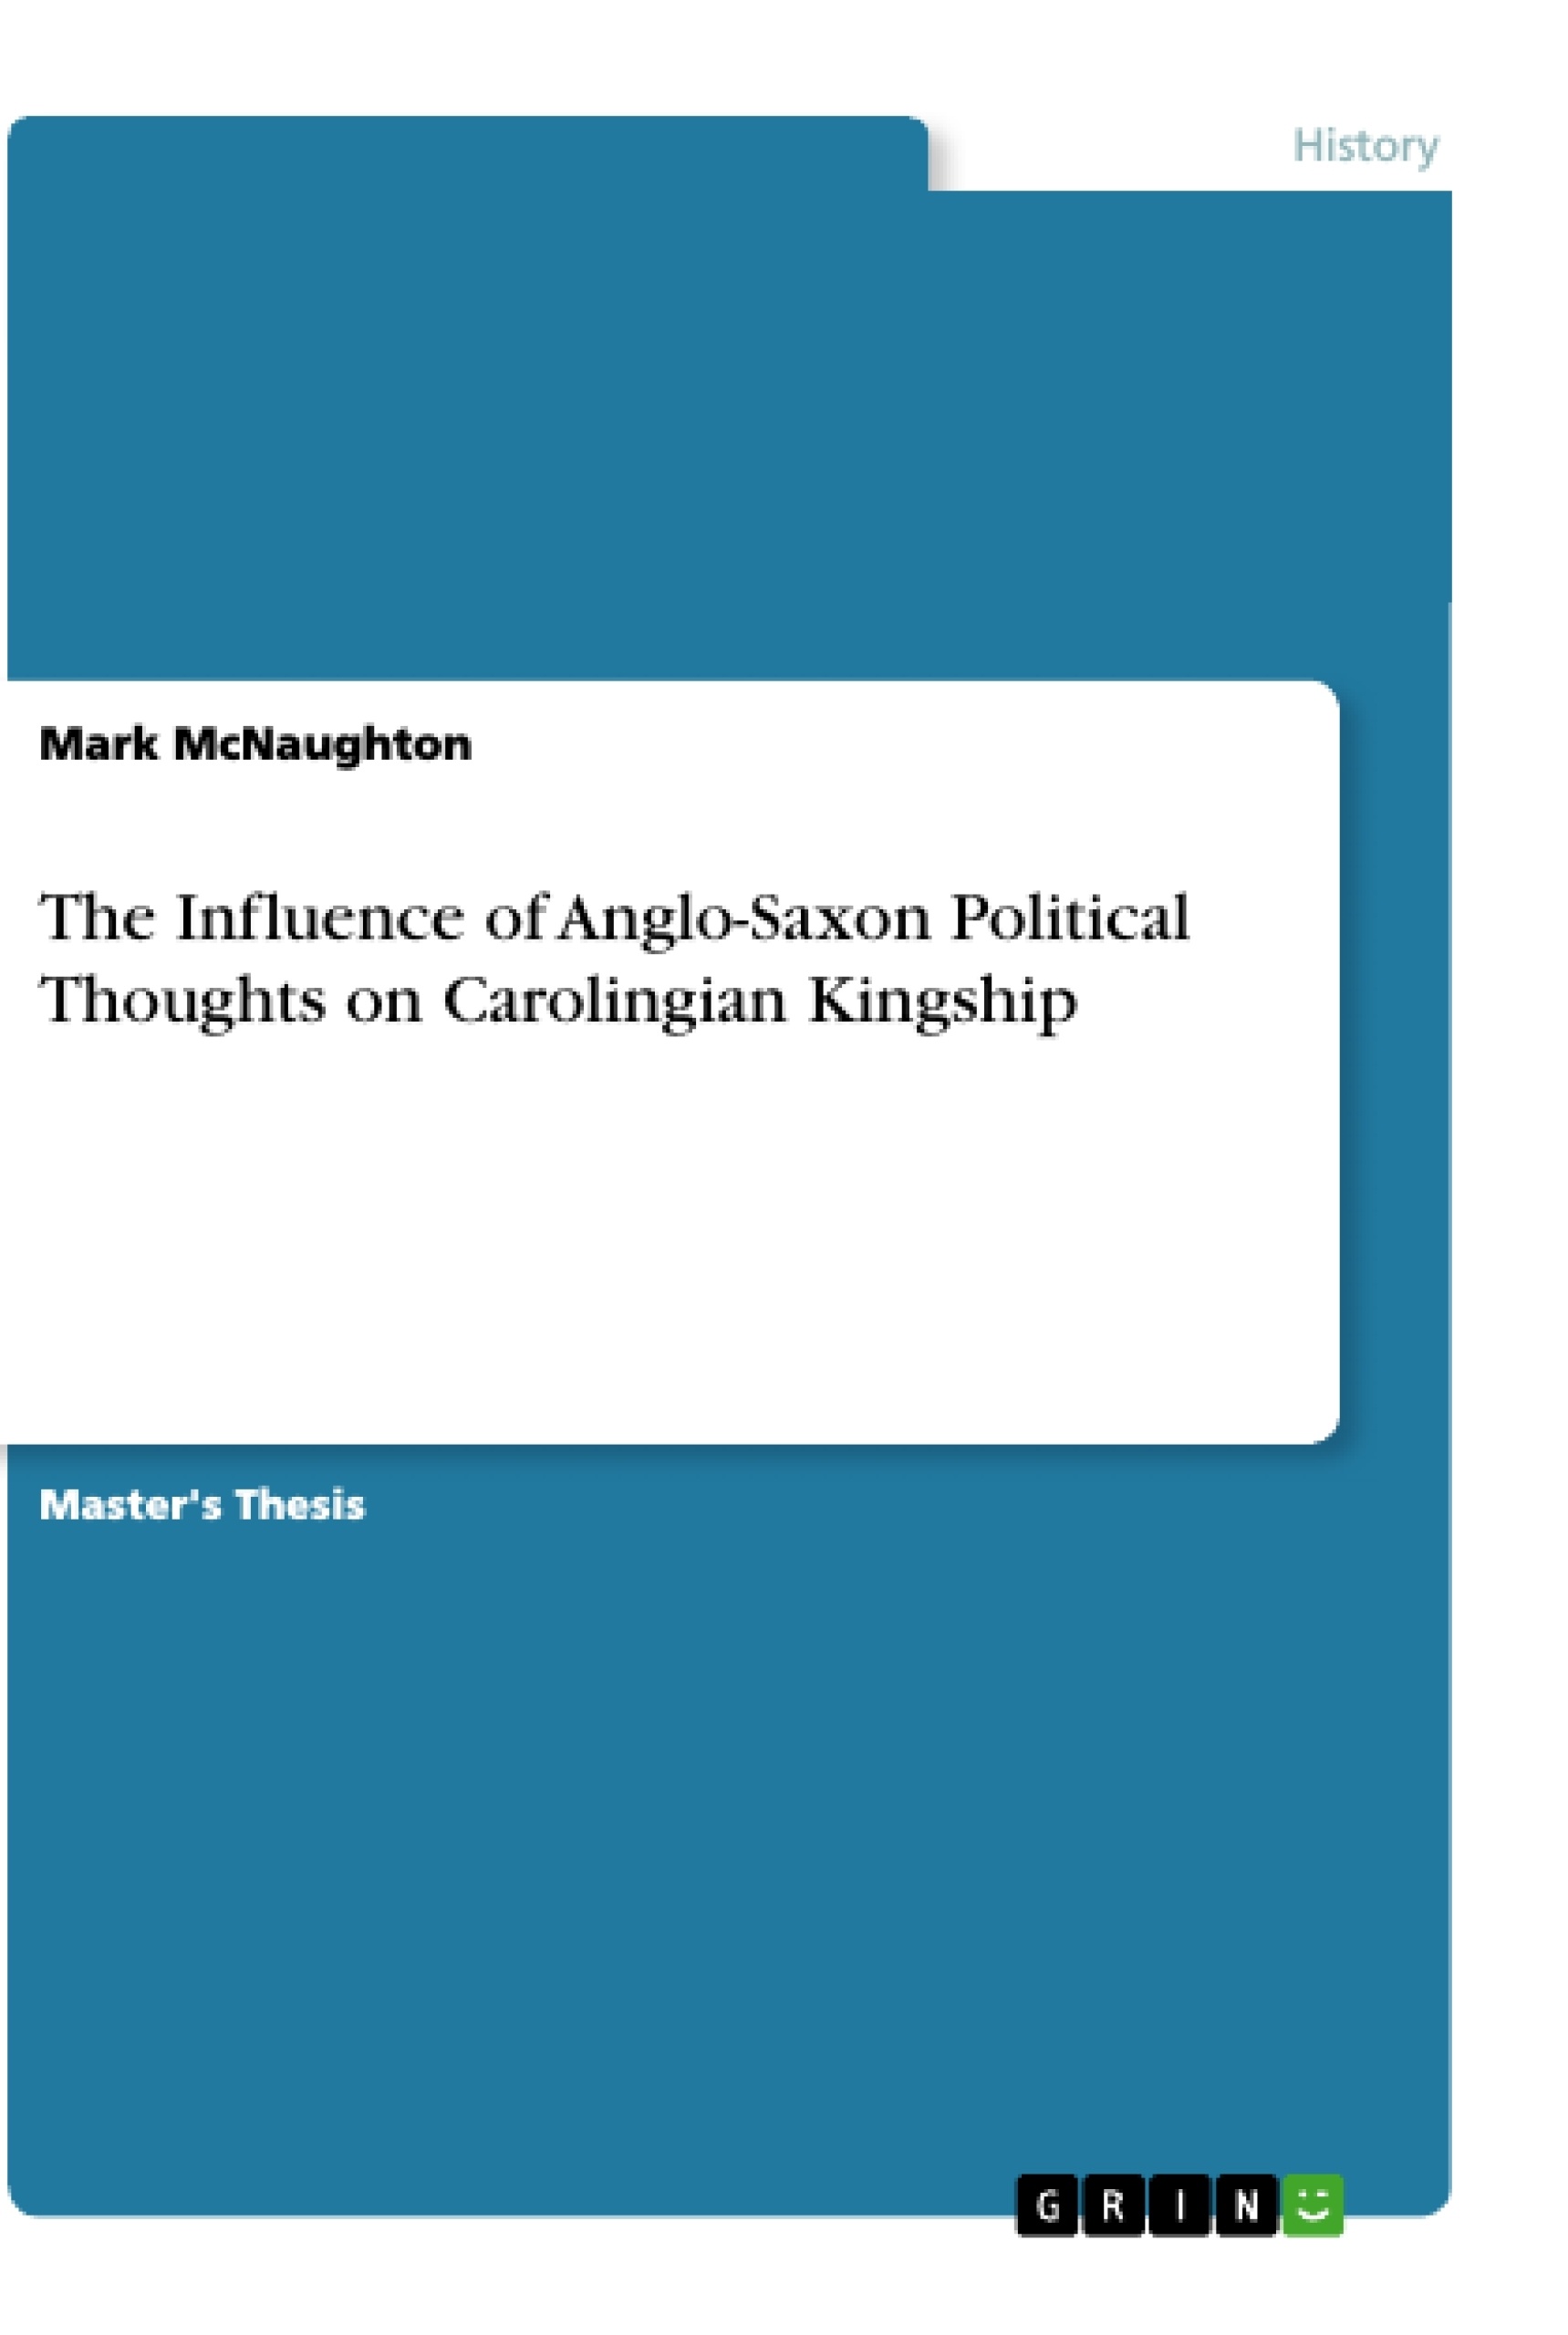 Title: The Influence of Anglo-Saxon Political Thoughts on Carolingian Kingship